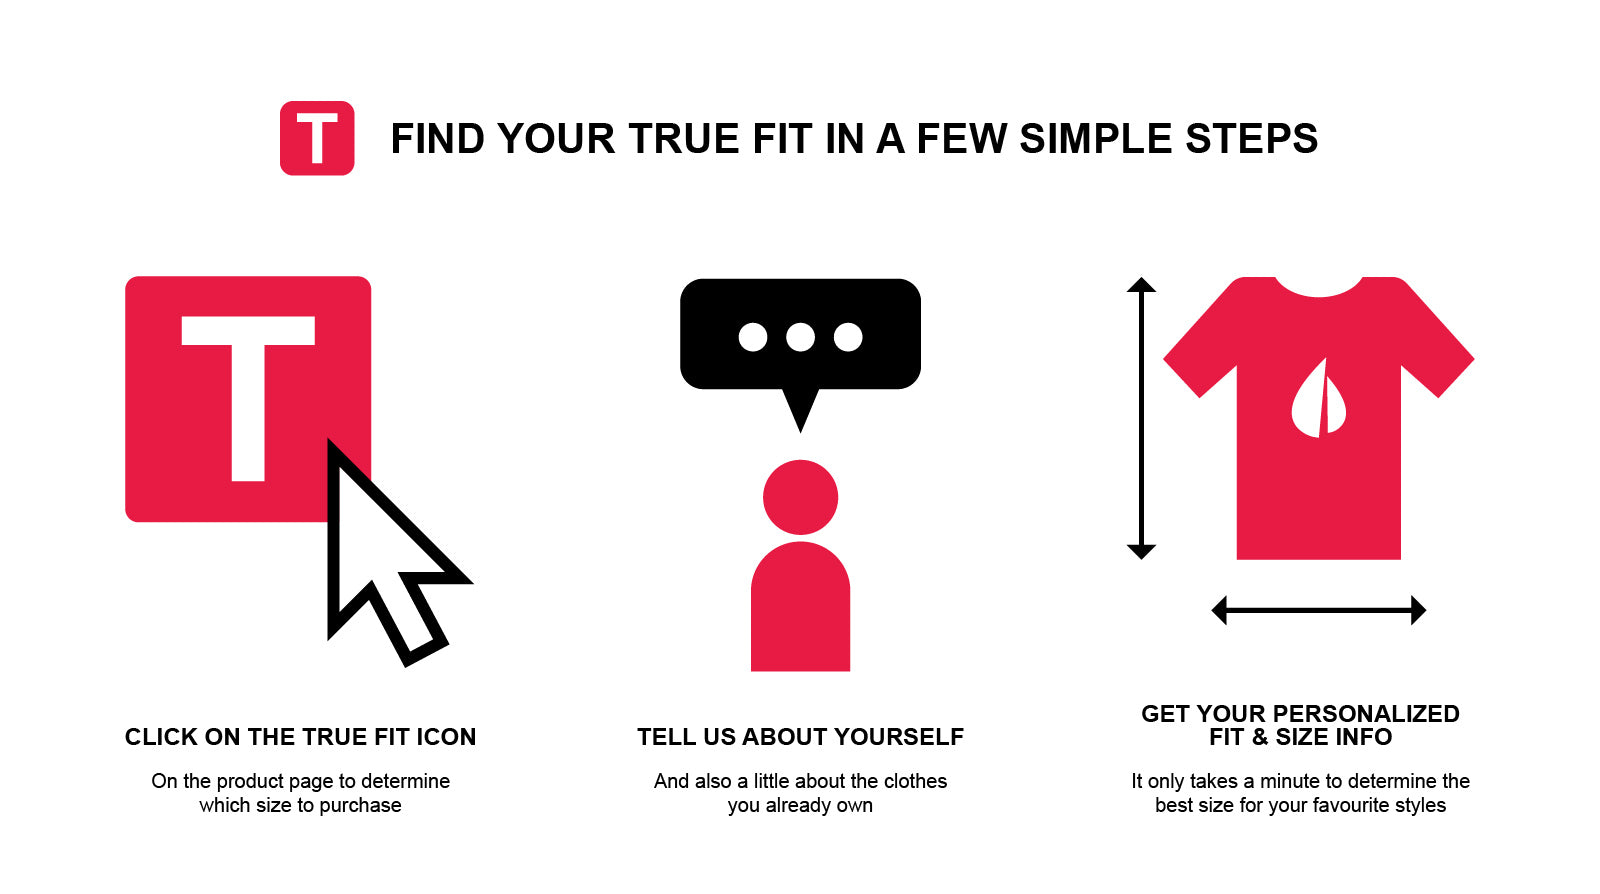 True Fit - Find Your Perfect Fit